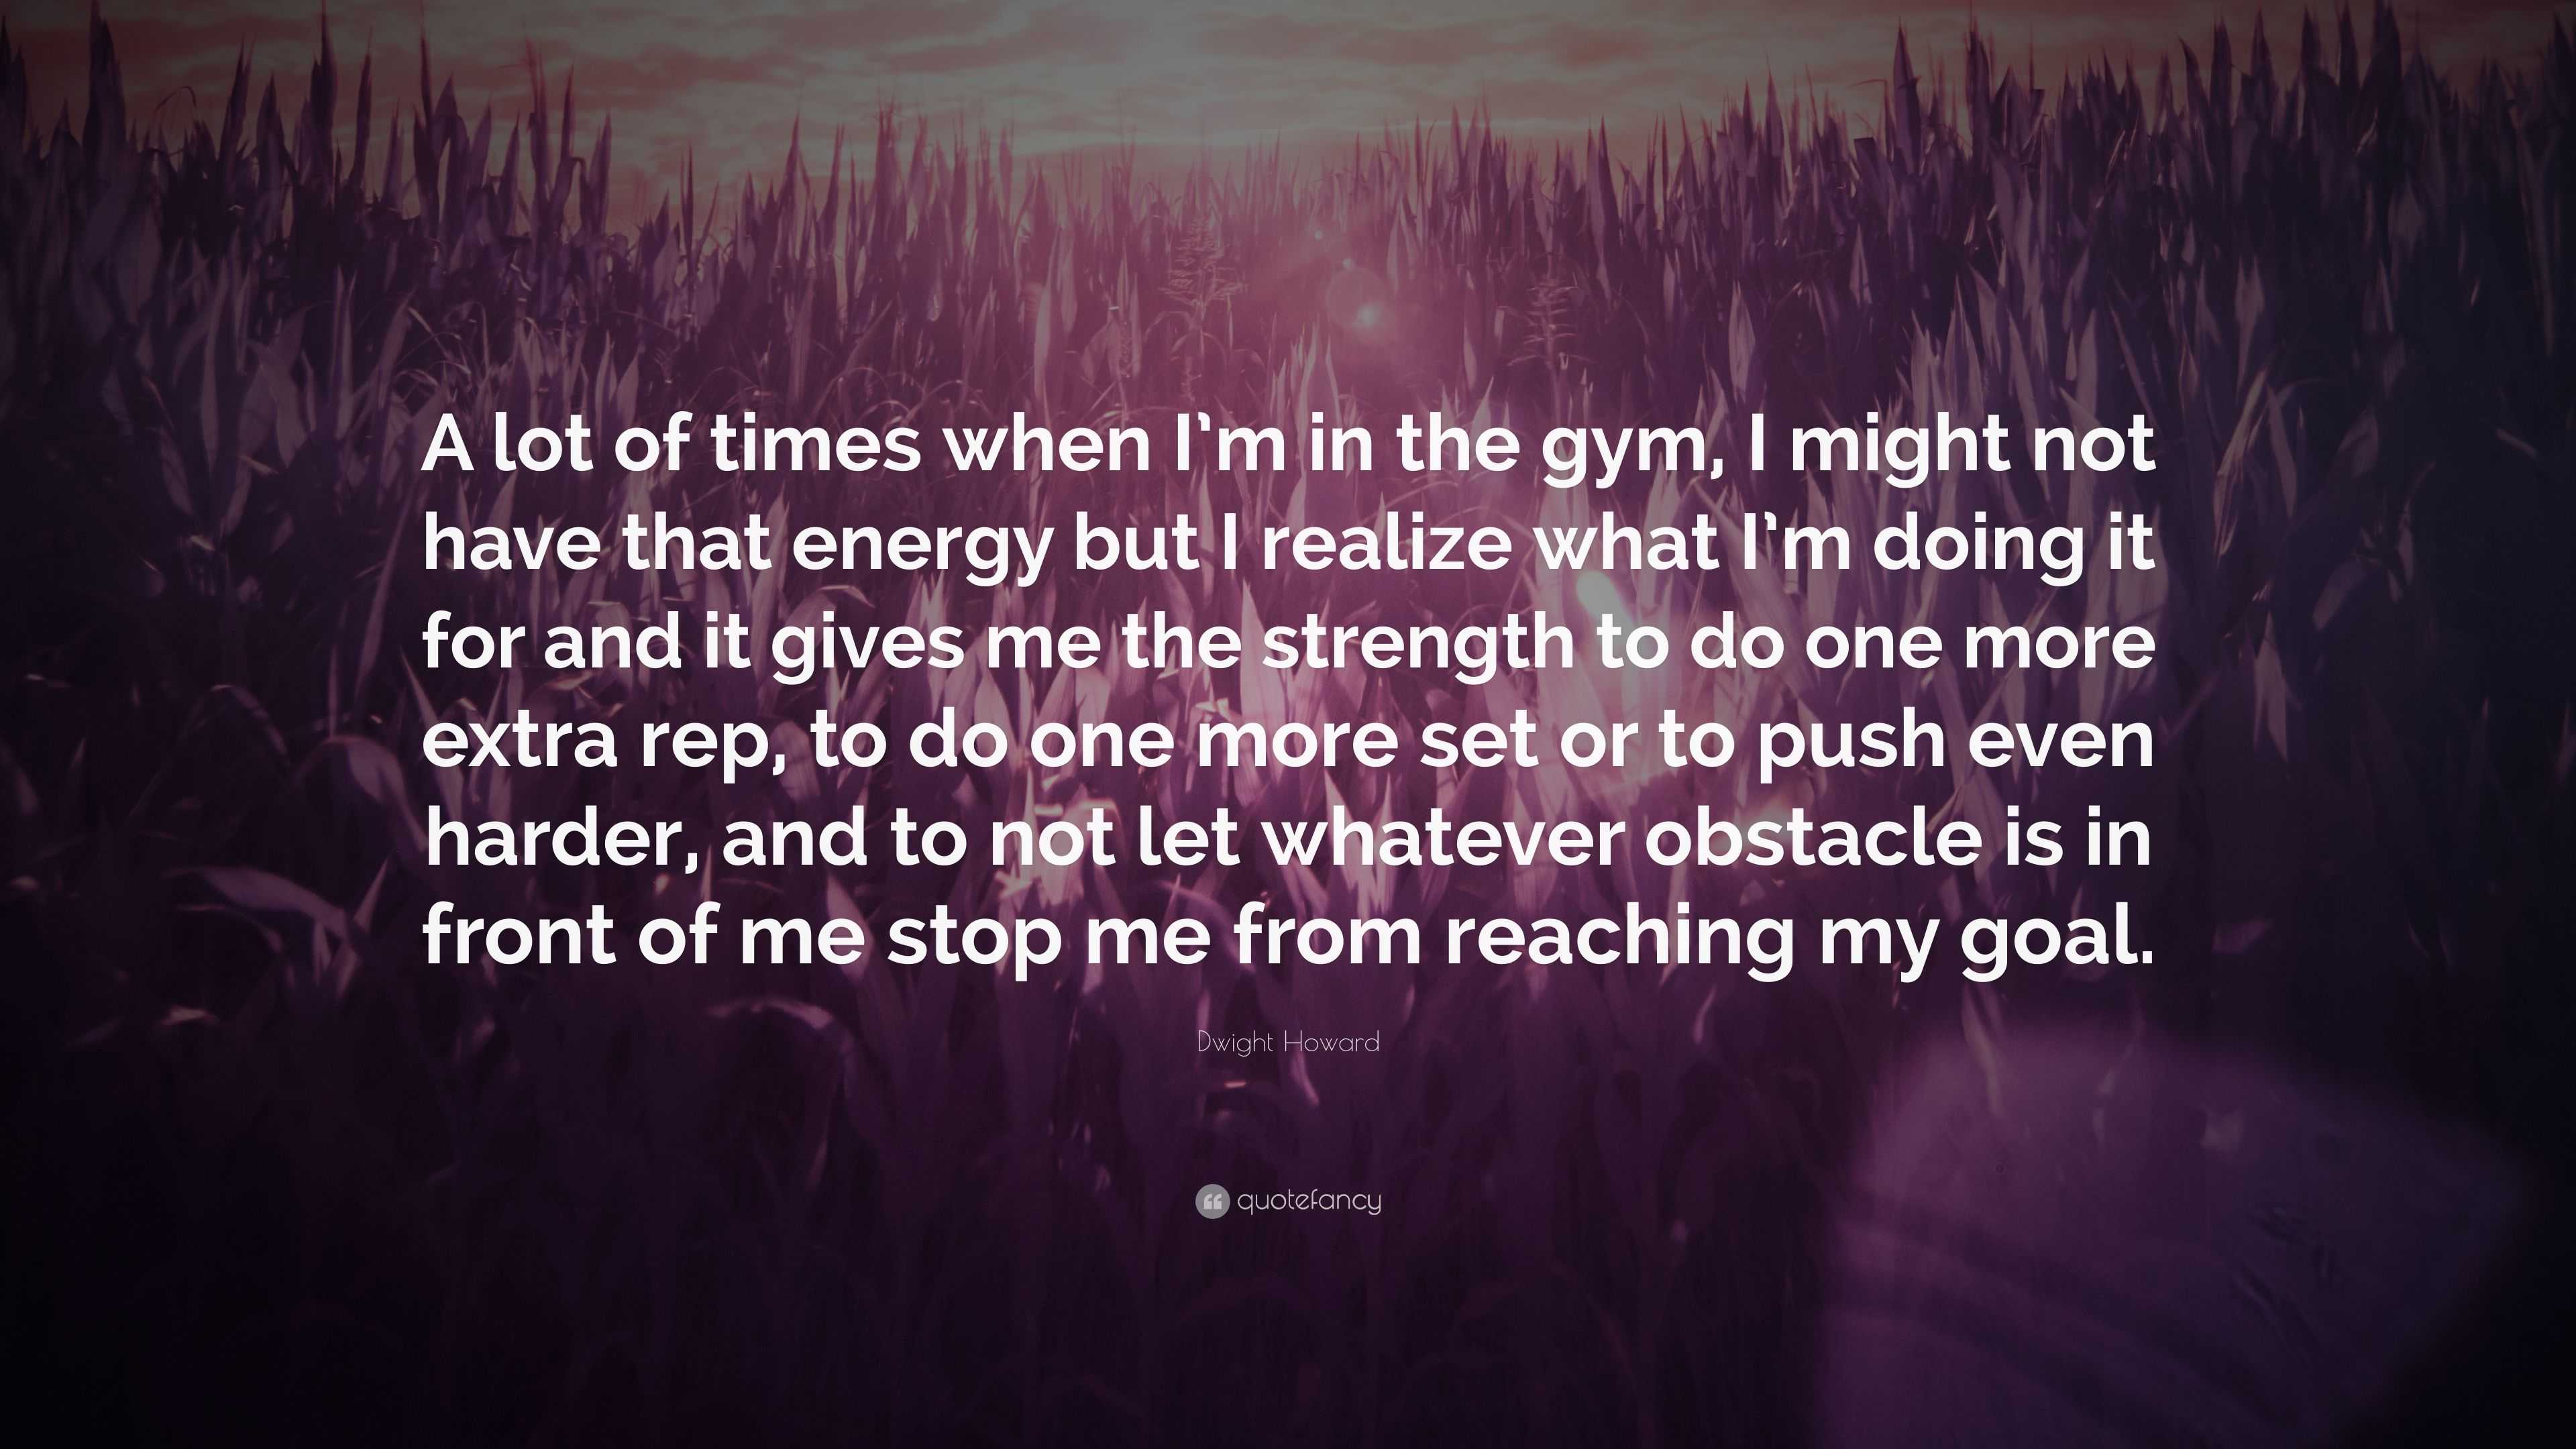 Dwight Howard Quote A Lot Of Times When I M In The Gym I Might Not Have That Energy But I Realize What I M Doing It For And It Gives Me The